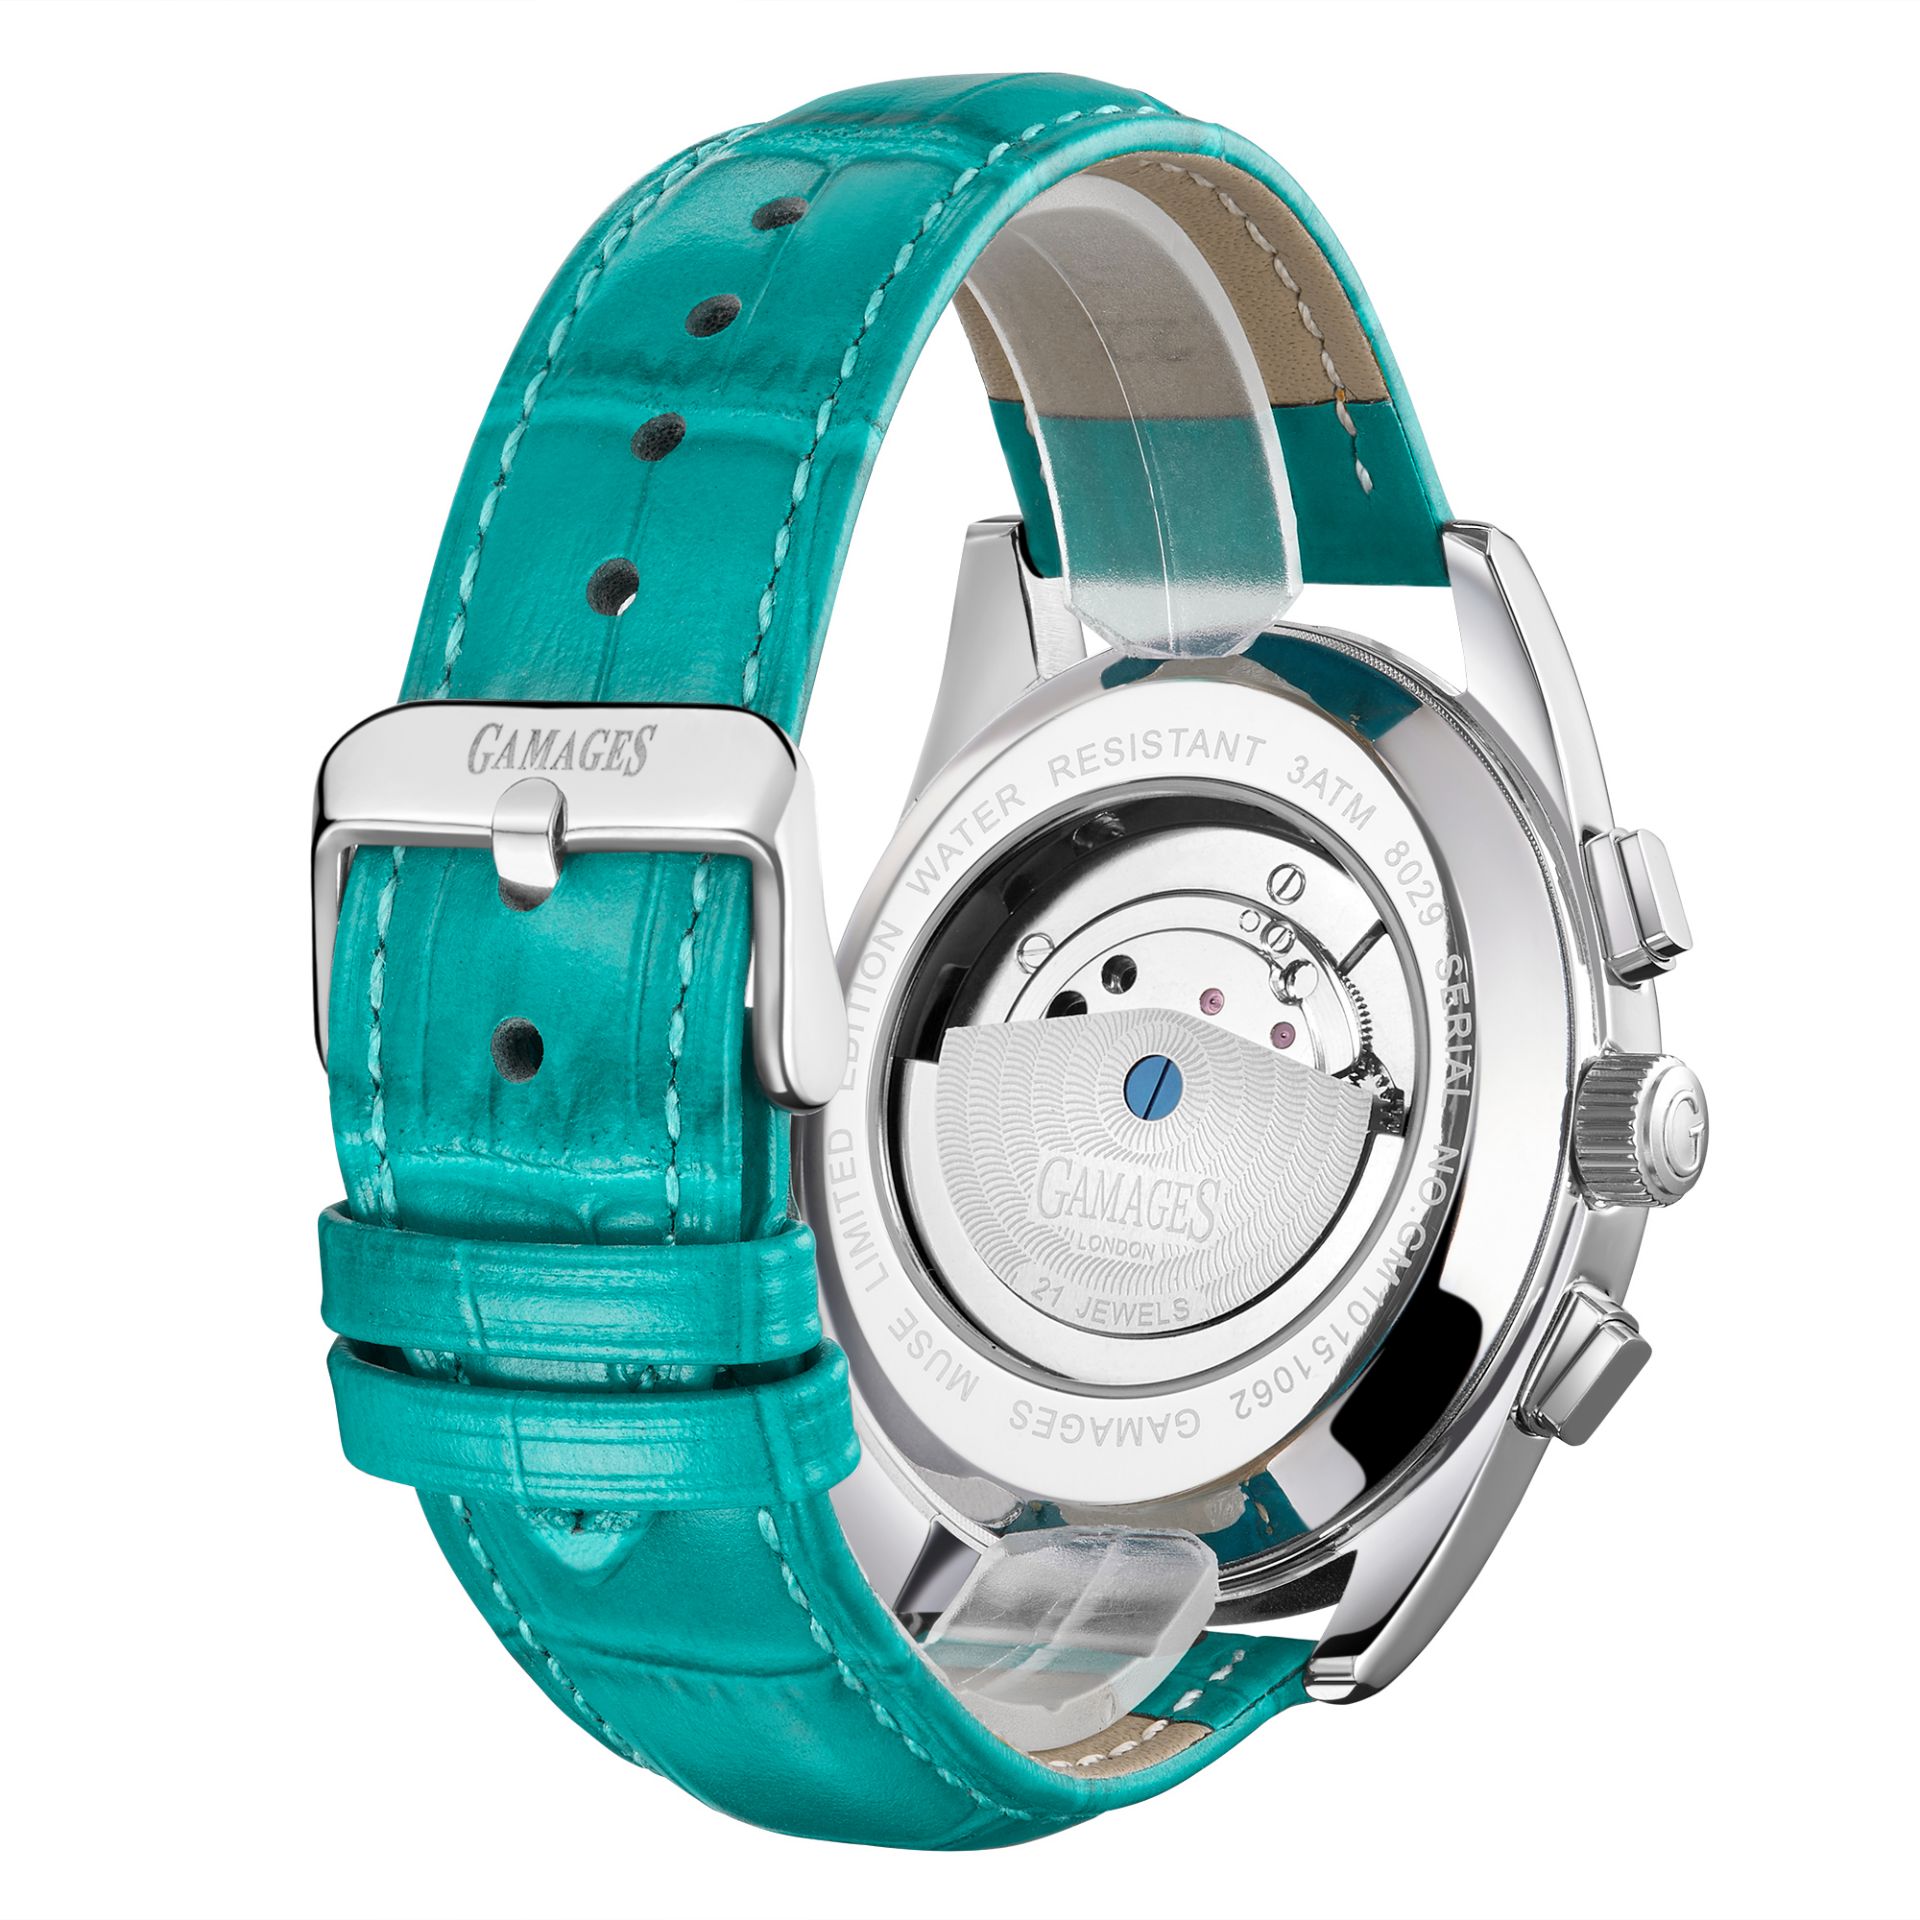 Gamages of London Hand Assembled Muse Automatic Silver Teal - 5 Year Warranty & Free Delivery - Image 5 of 5